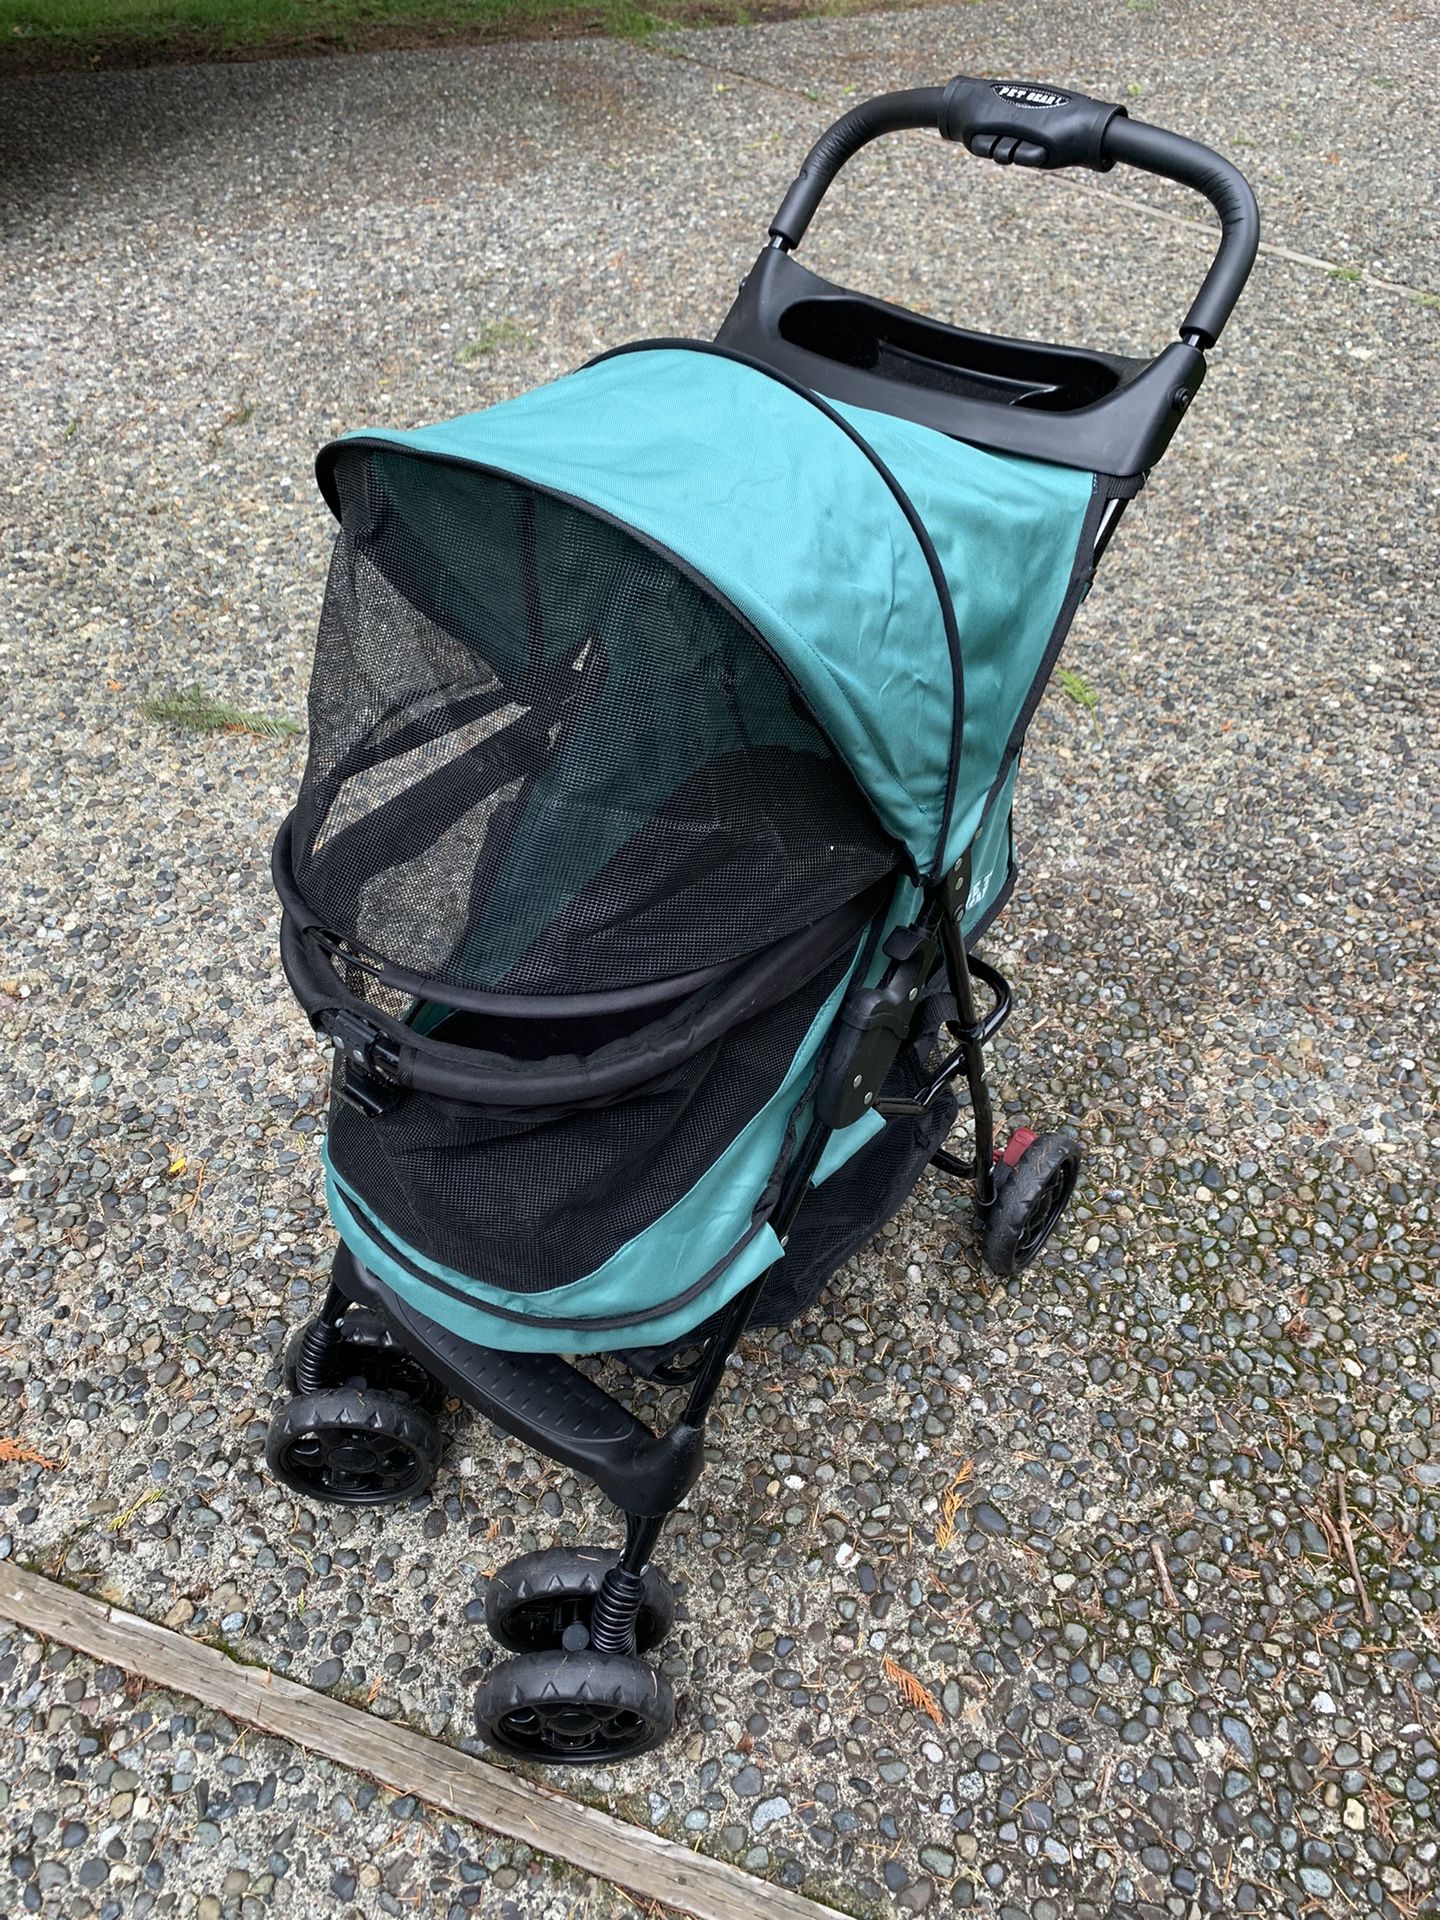 Dog Stroller For Small Breed. 